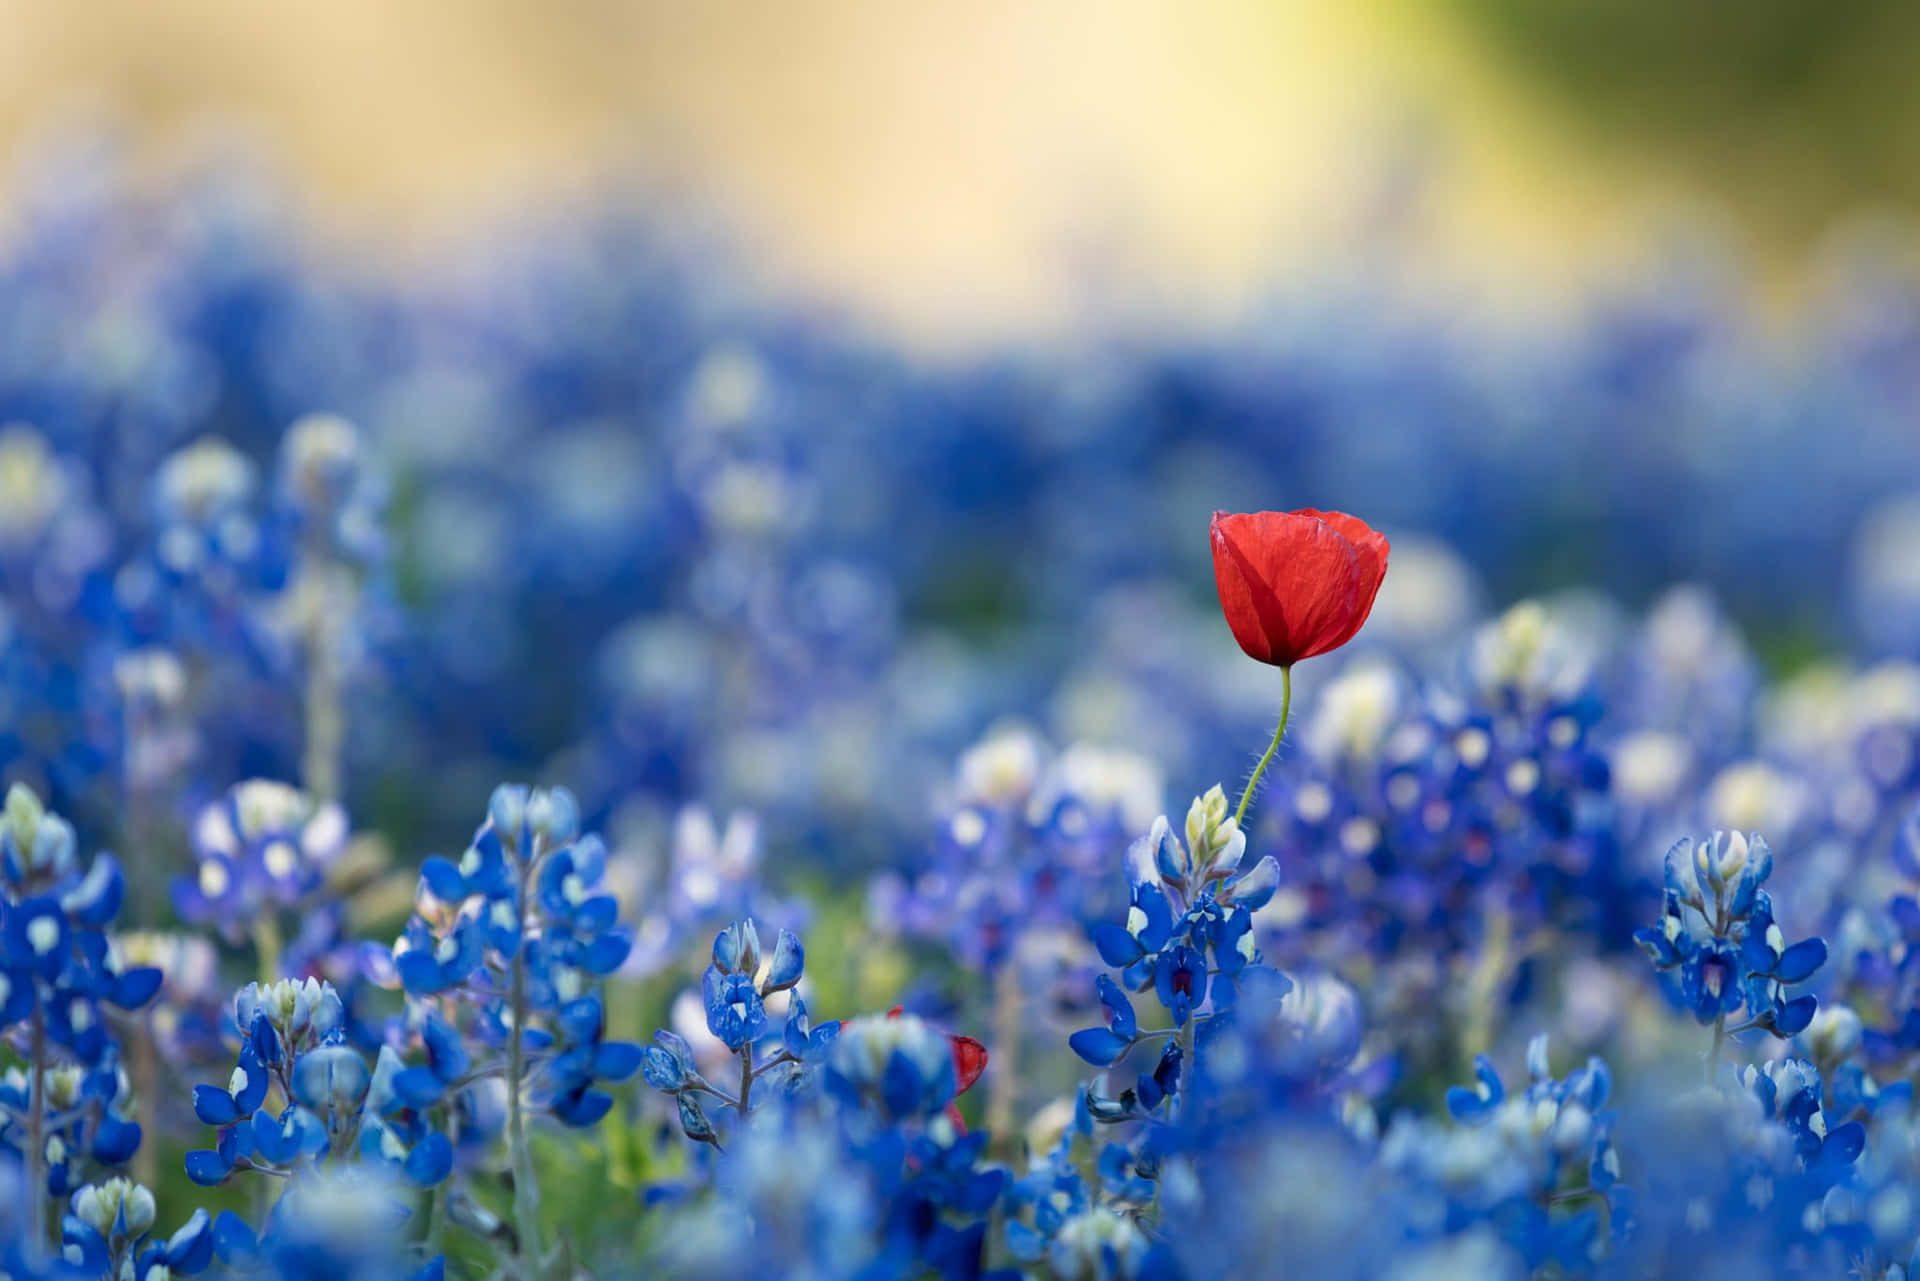 A Red Flower Stands Alone In A Field Of Bluebonnets Wallpaper